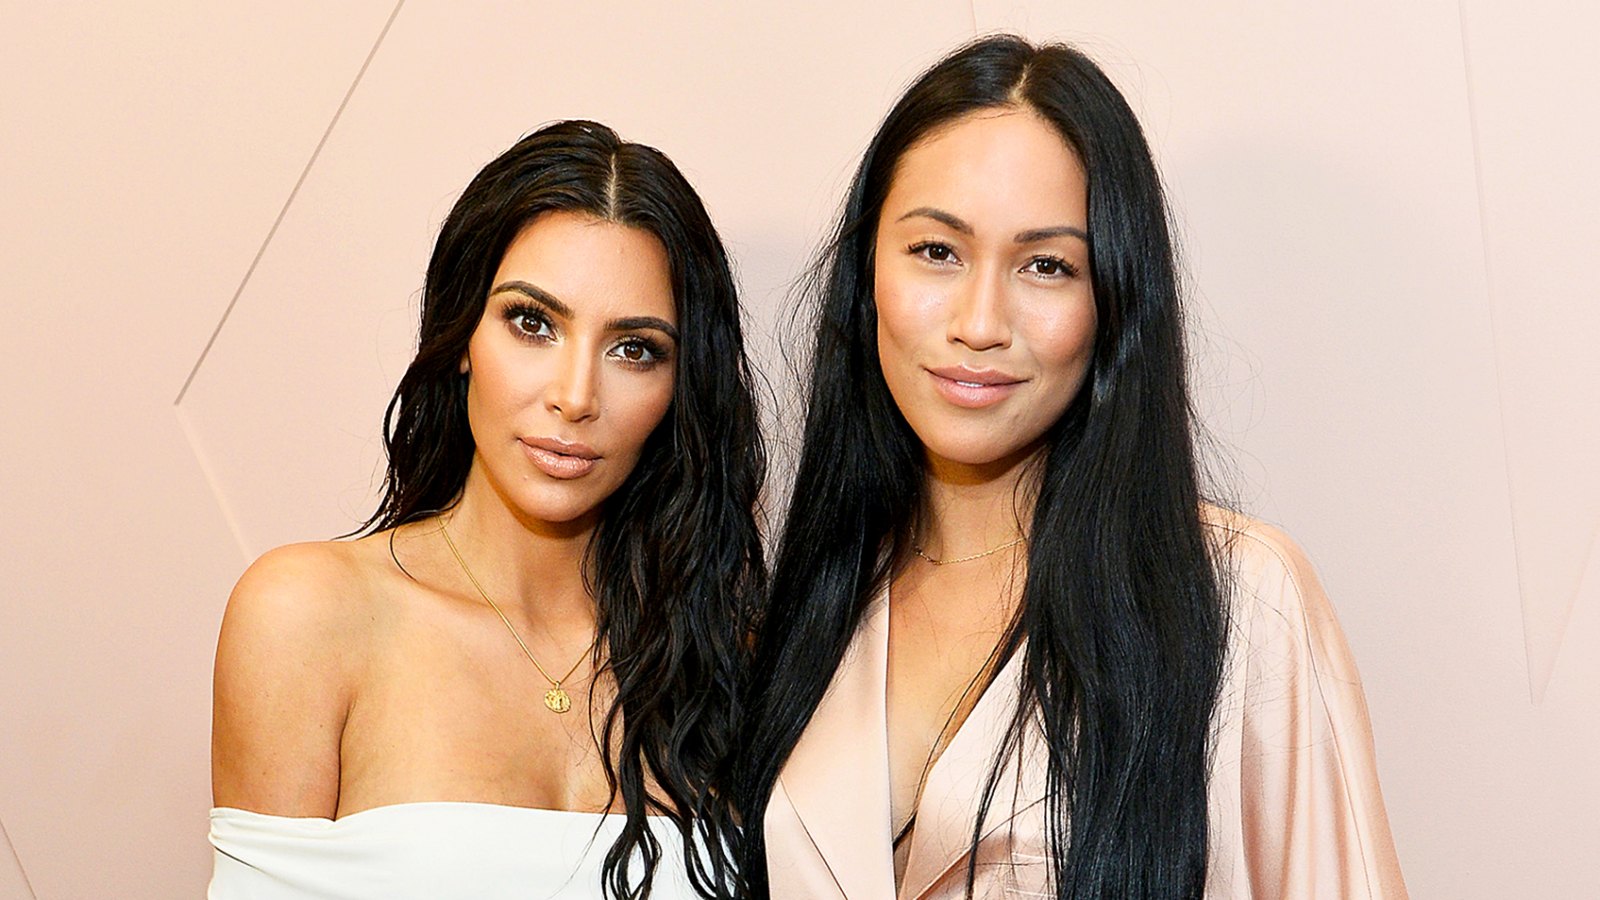 Kim Kardashian and Stephanie Sheppard celebrate The Launch Of KKW Beauty on June 20, 2017 in Los Angeles, California.